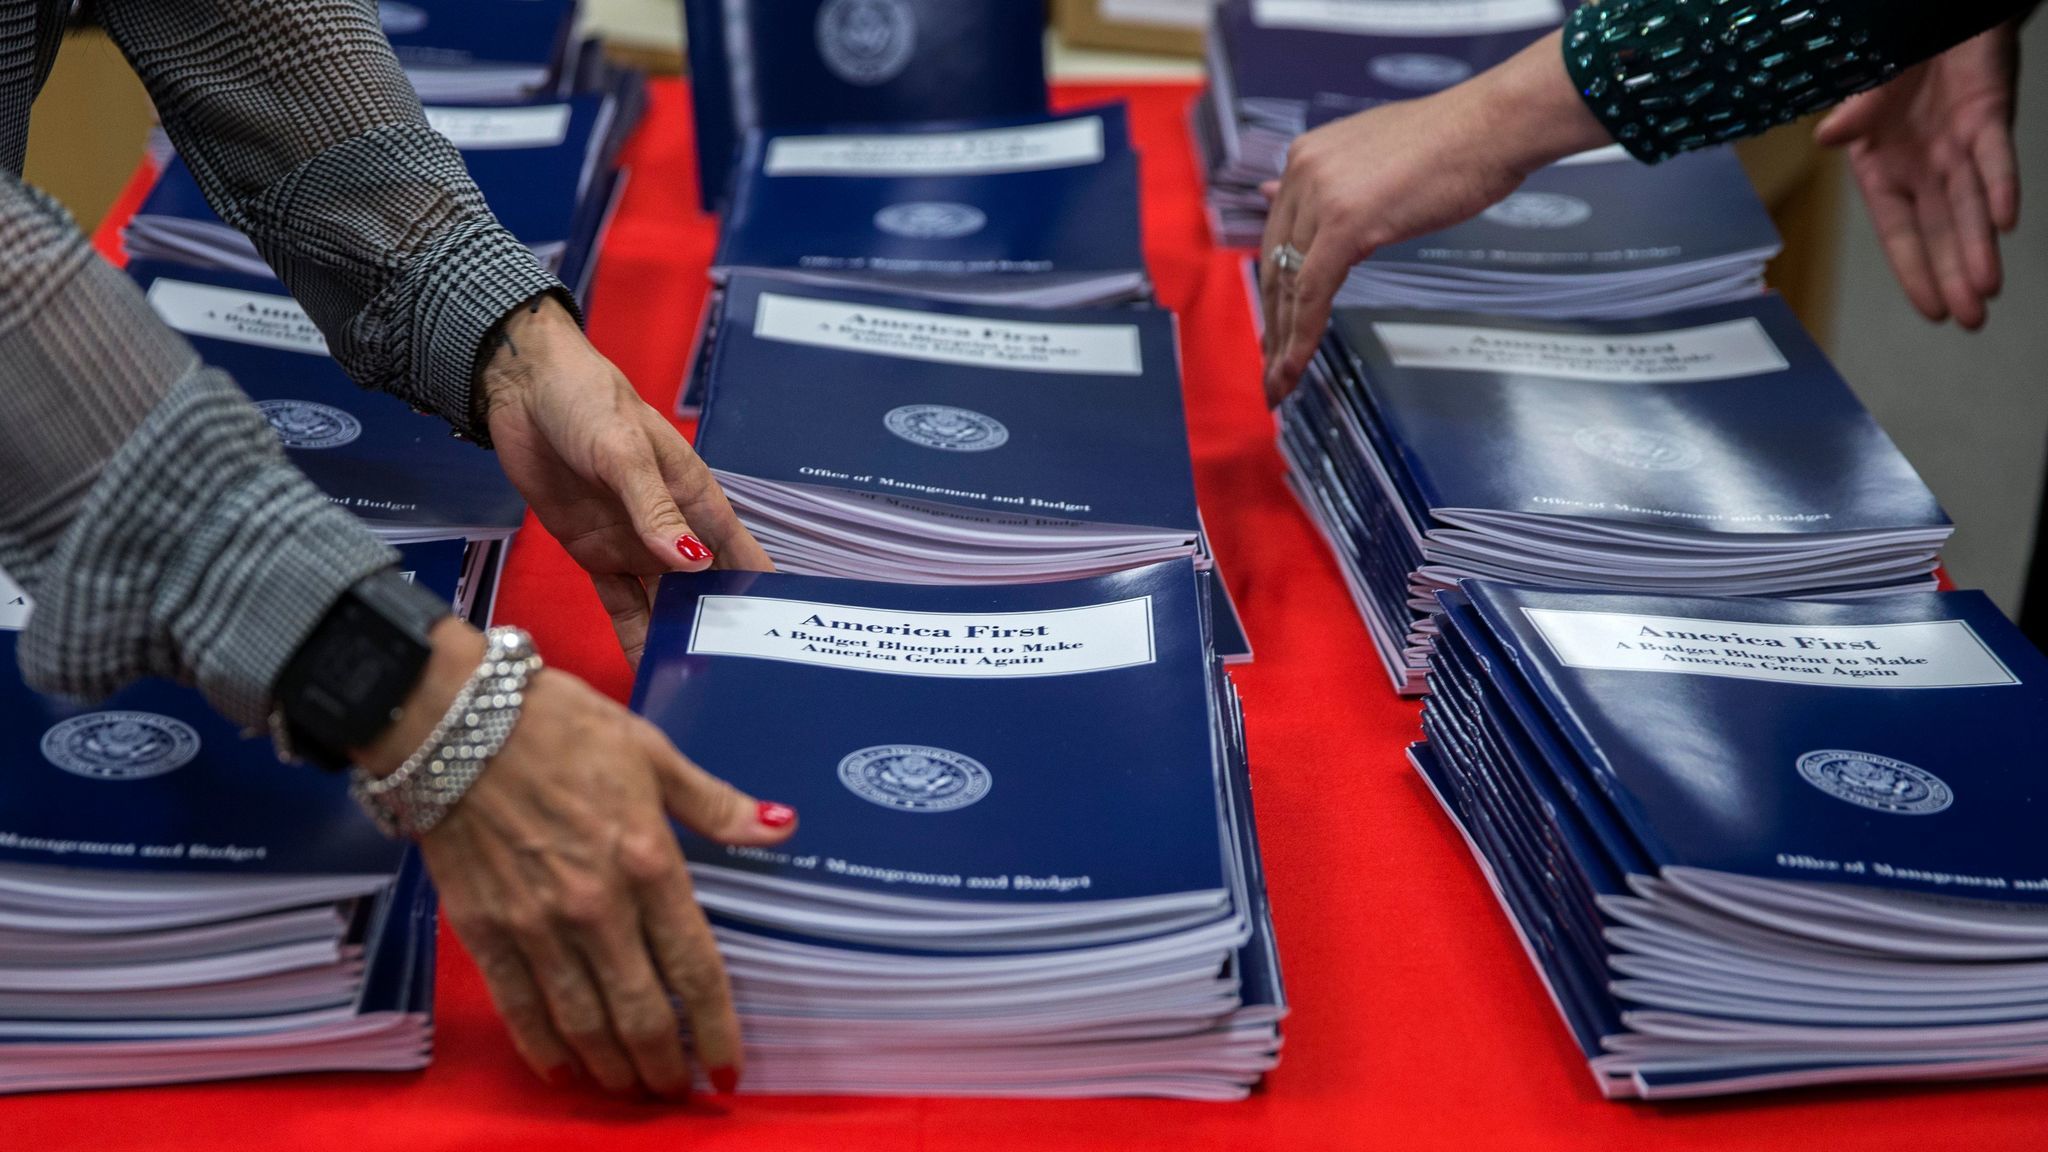 Copies of President Trump's America First budget at the Government Publishing Officebookstore in Washington, D.C.